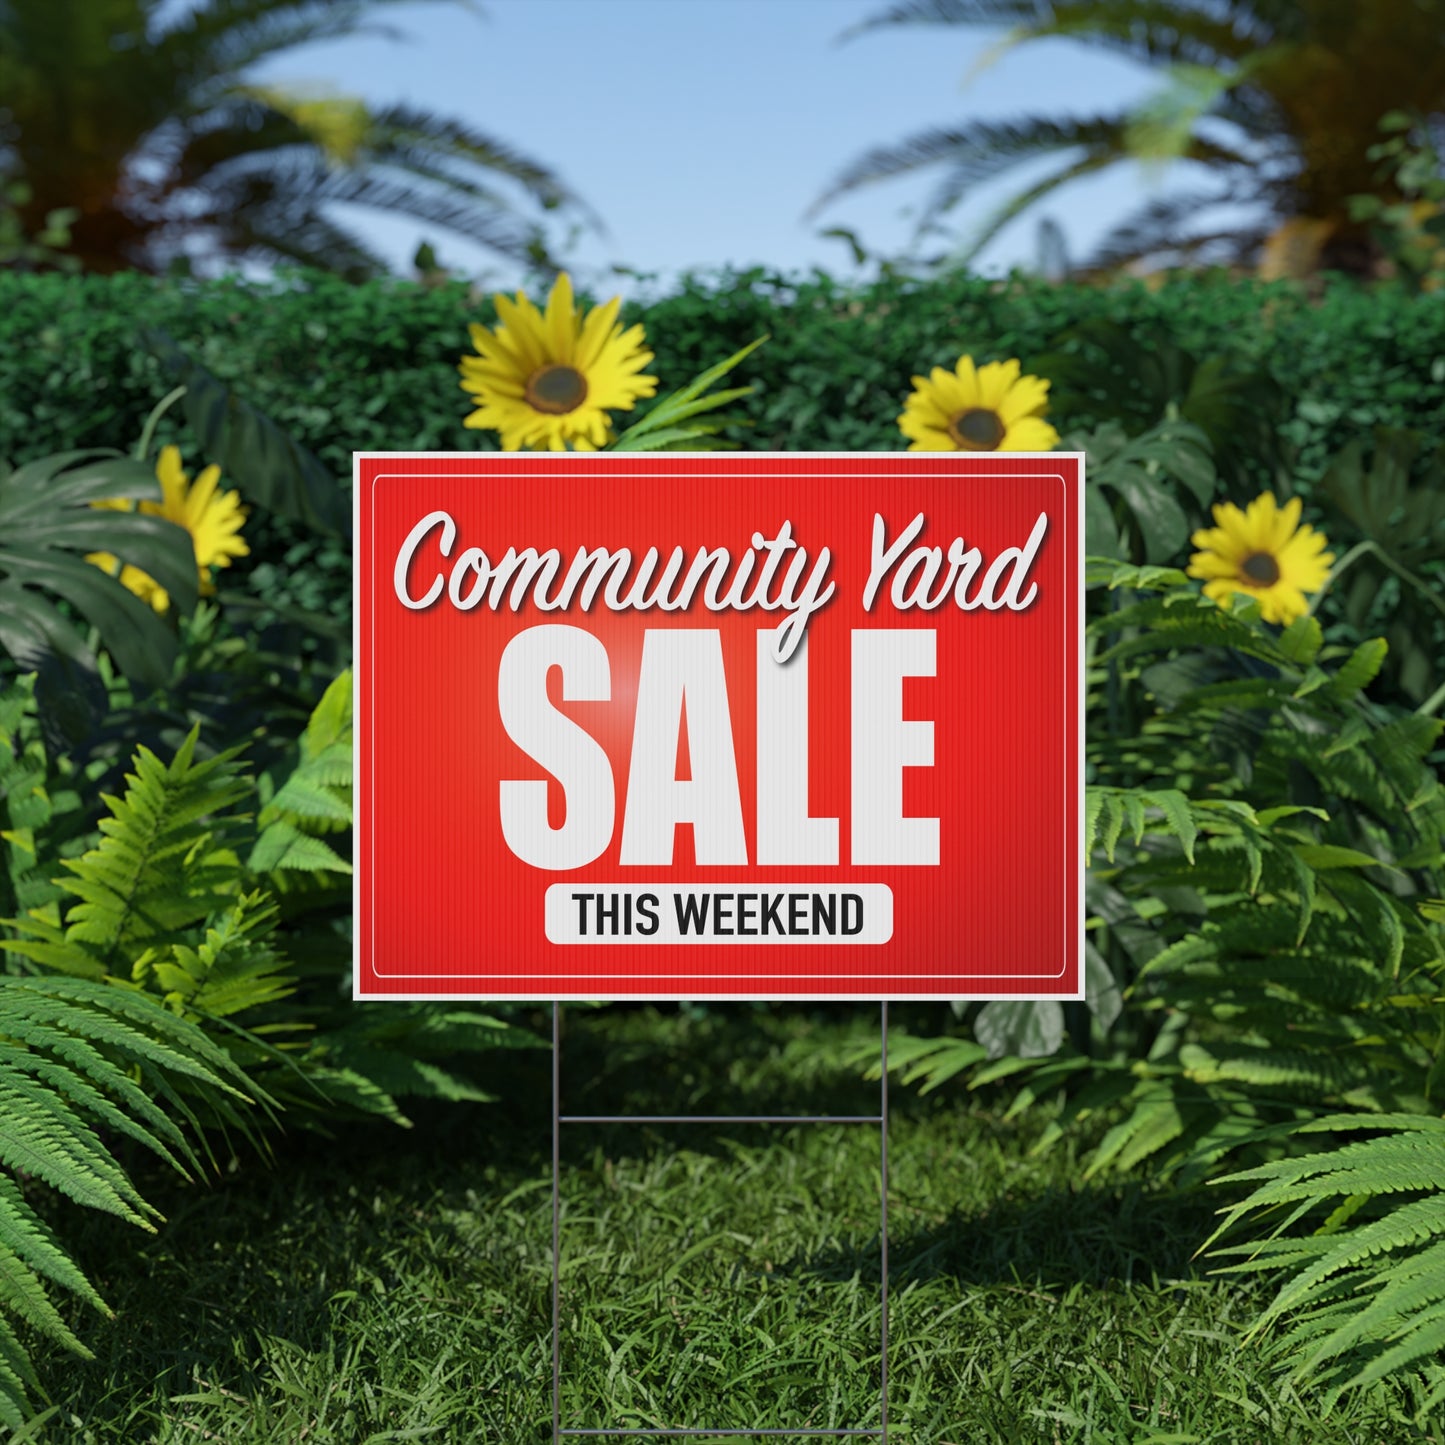 Community Garage Sale, Yard Sale Sign, 24x18 or 36x24 inch, Double Sided, H-Stake Included, v4